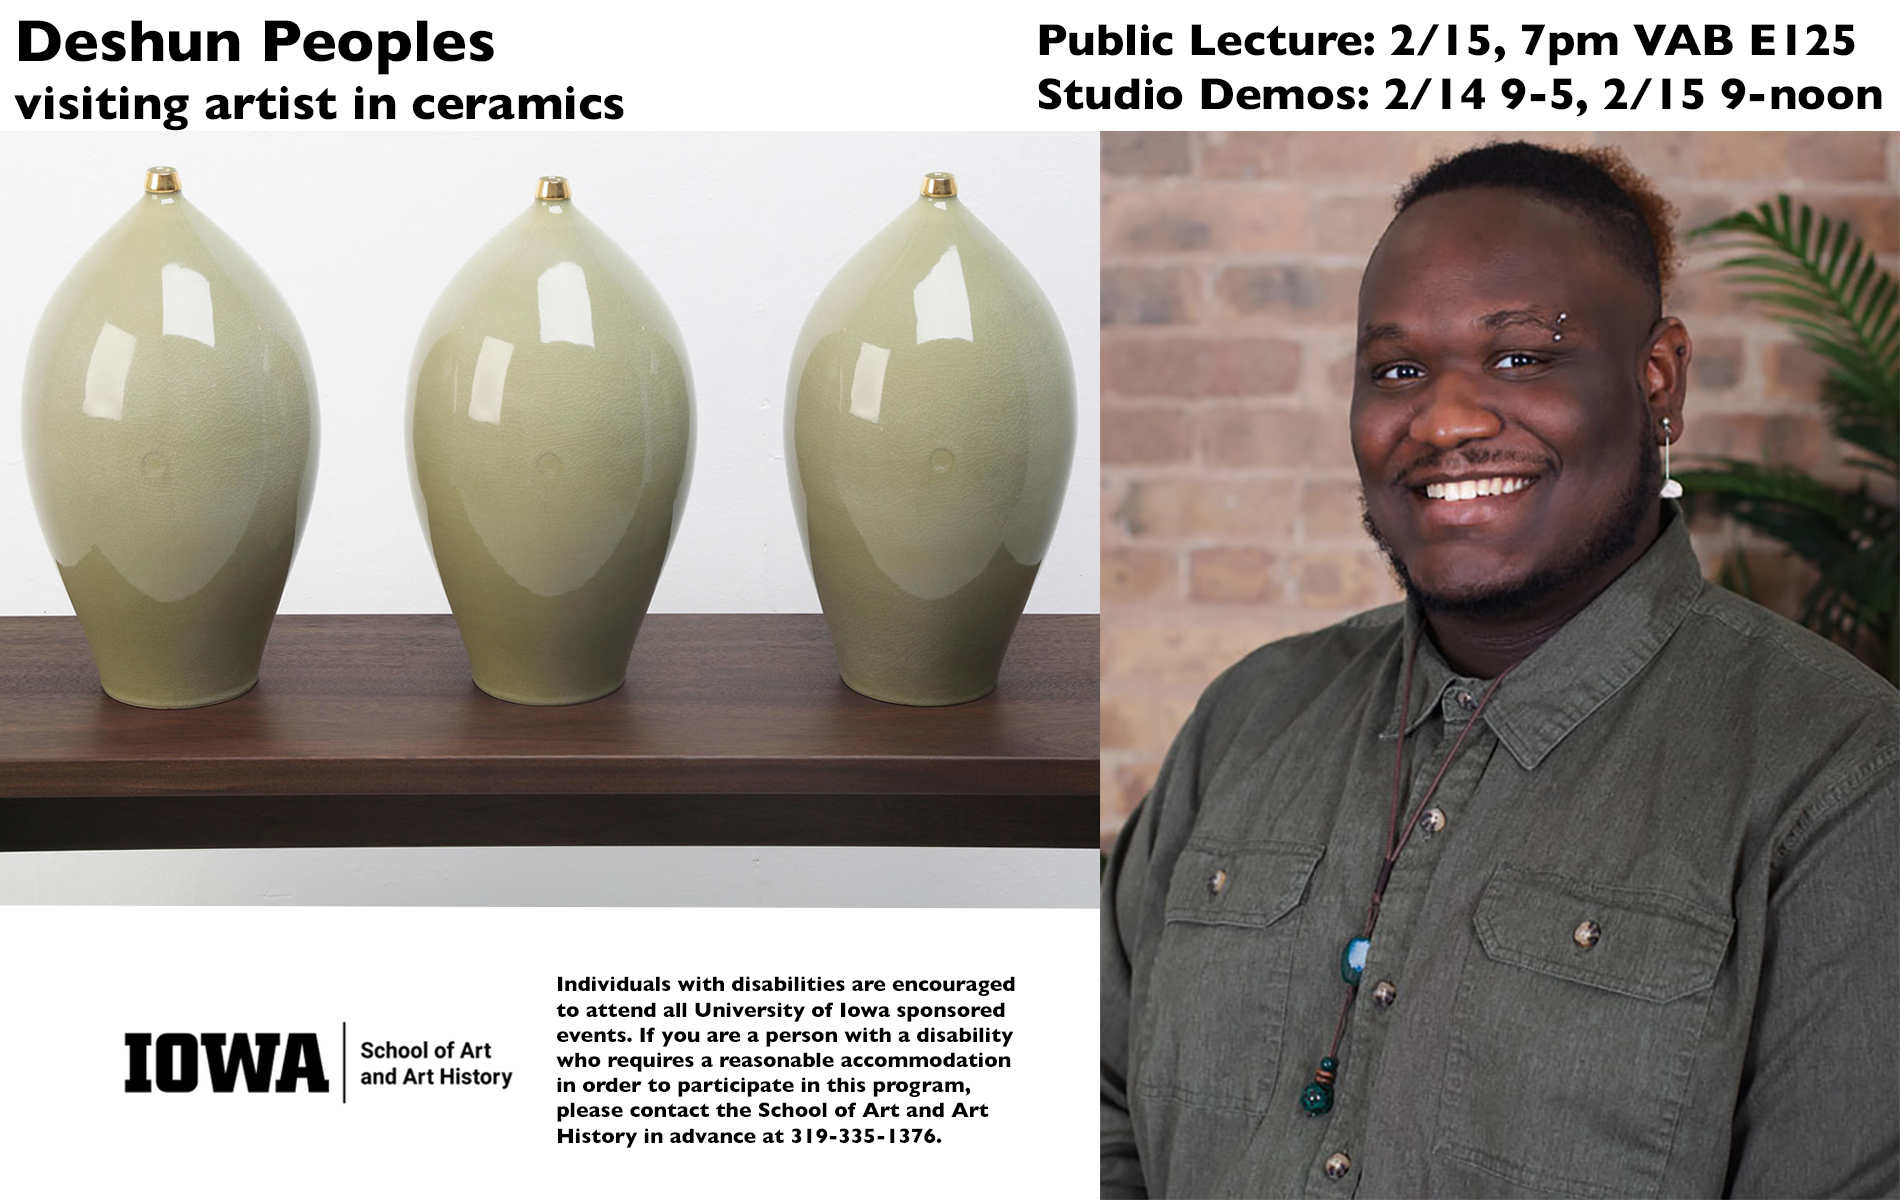 Deshun Peoples Visiting Artist in Ceramics Public Lecture February 15, 2024 7:00PM E125 Visual Arts Building Studio Demos February 14, 2024 9:00-5:00 and February 15, 2024 9:00-Noon